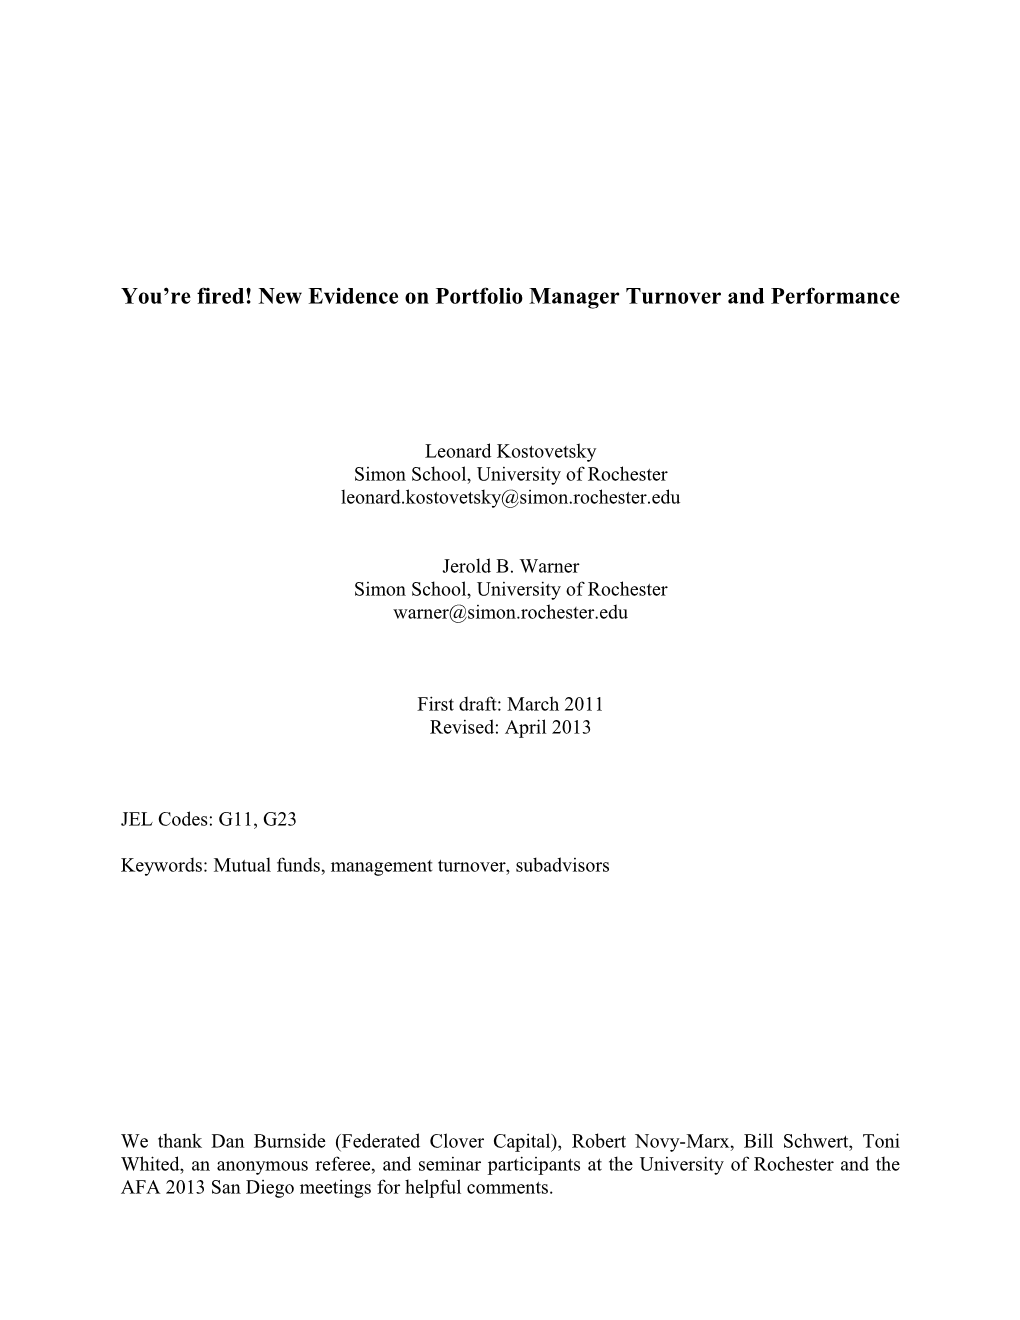 You Re Fired! New Evidence on Portfolio Manager Turnover and Performance